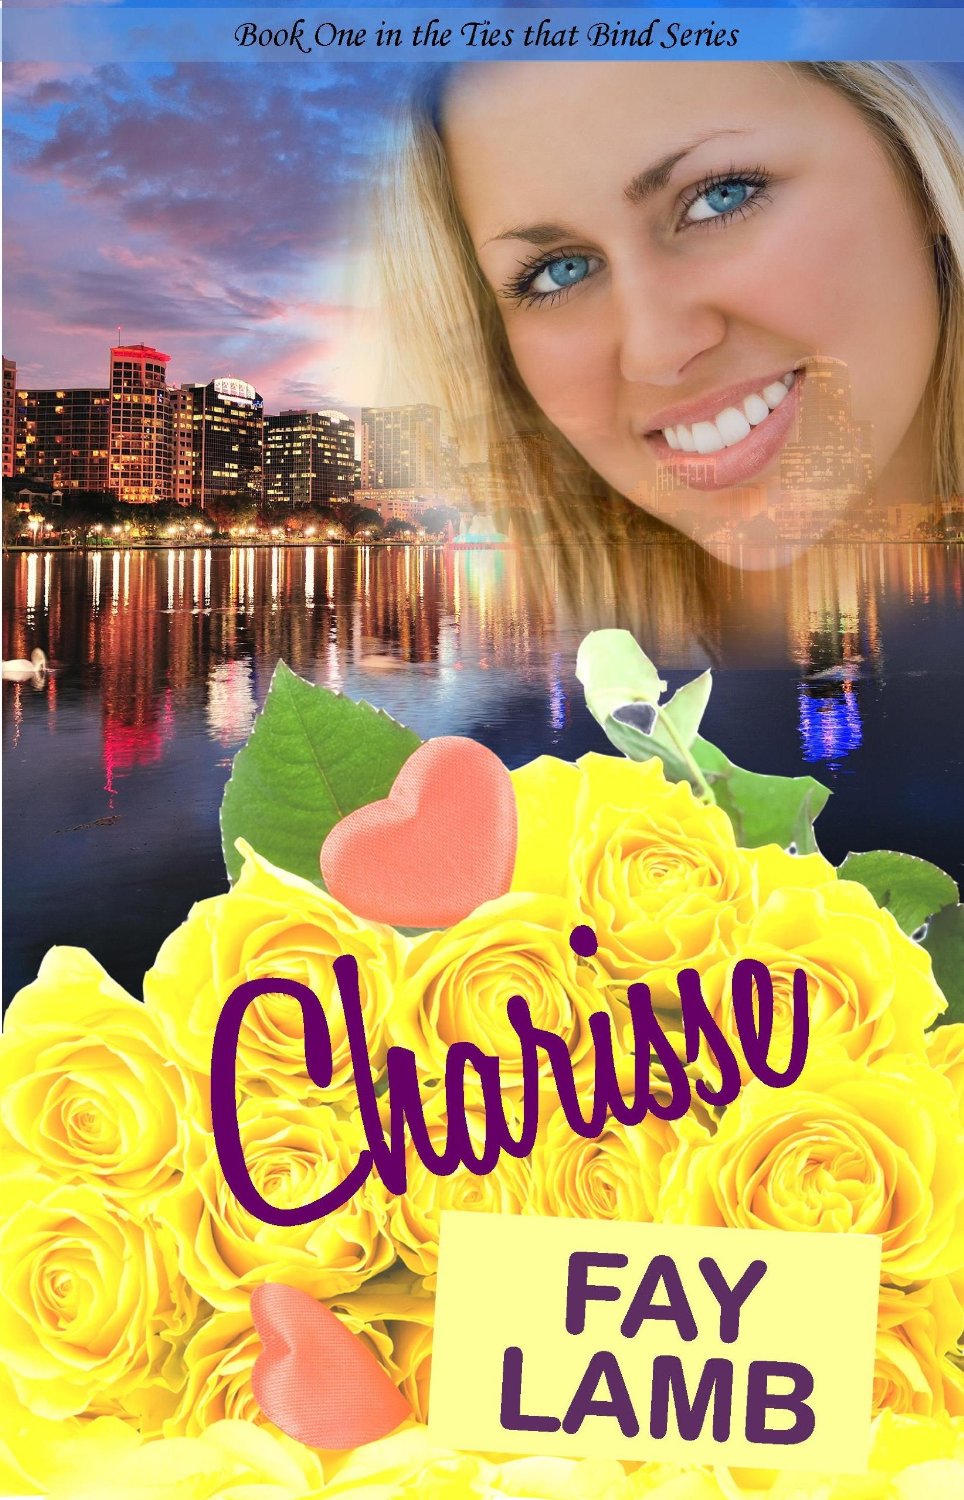 Video of the Week: Charisse by Fay Lamb